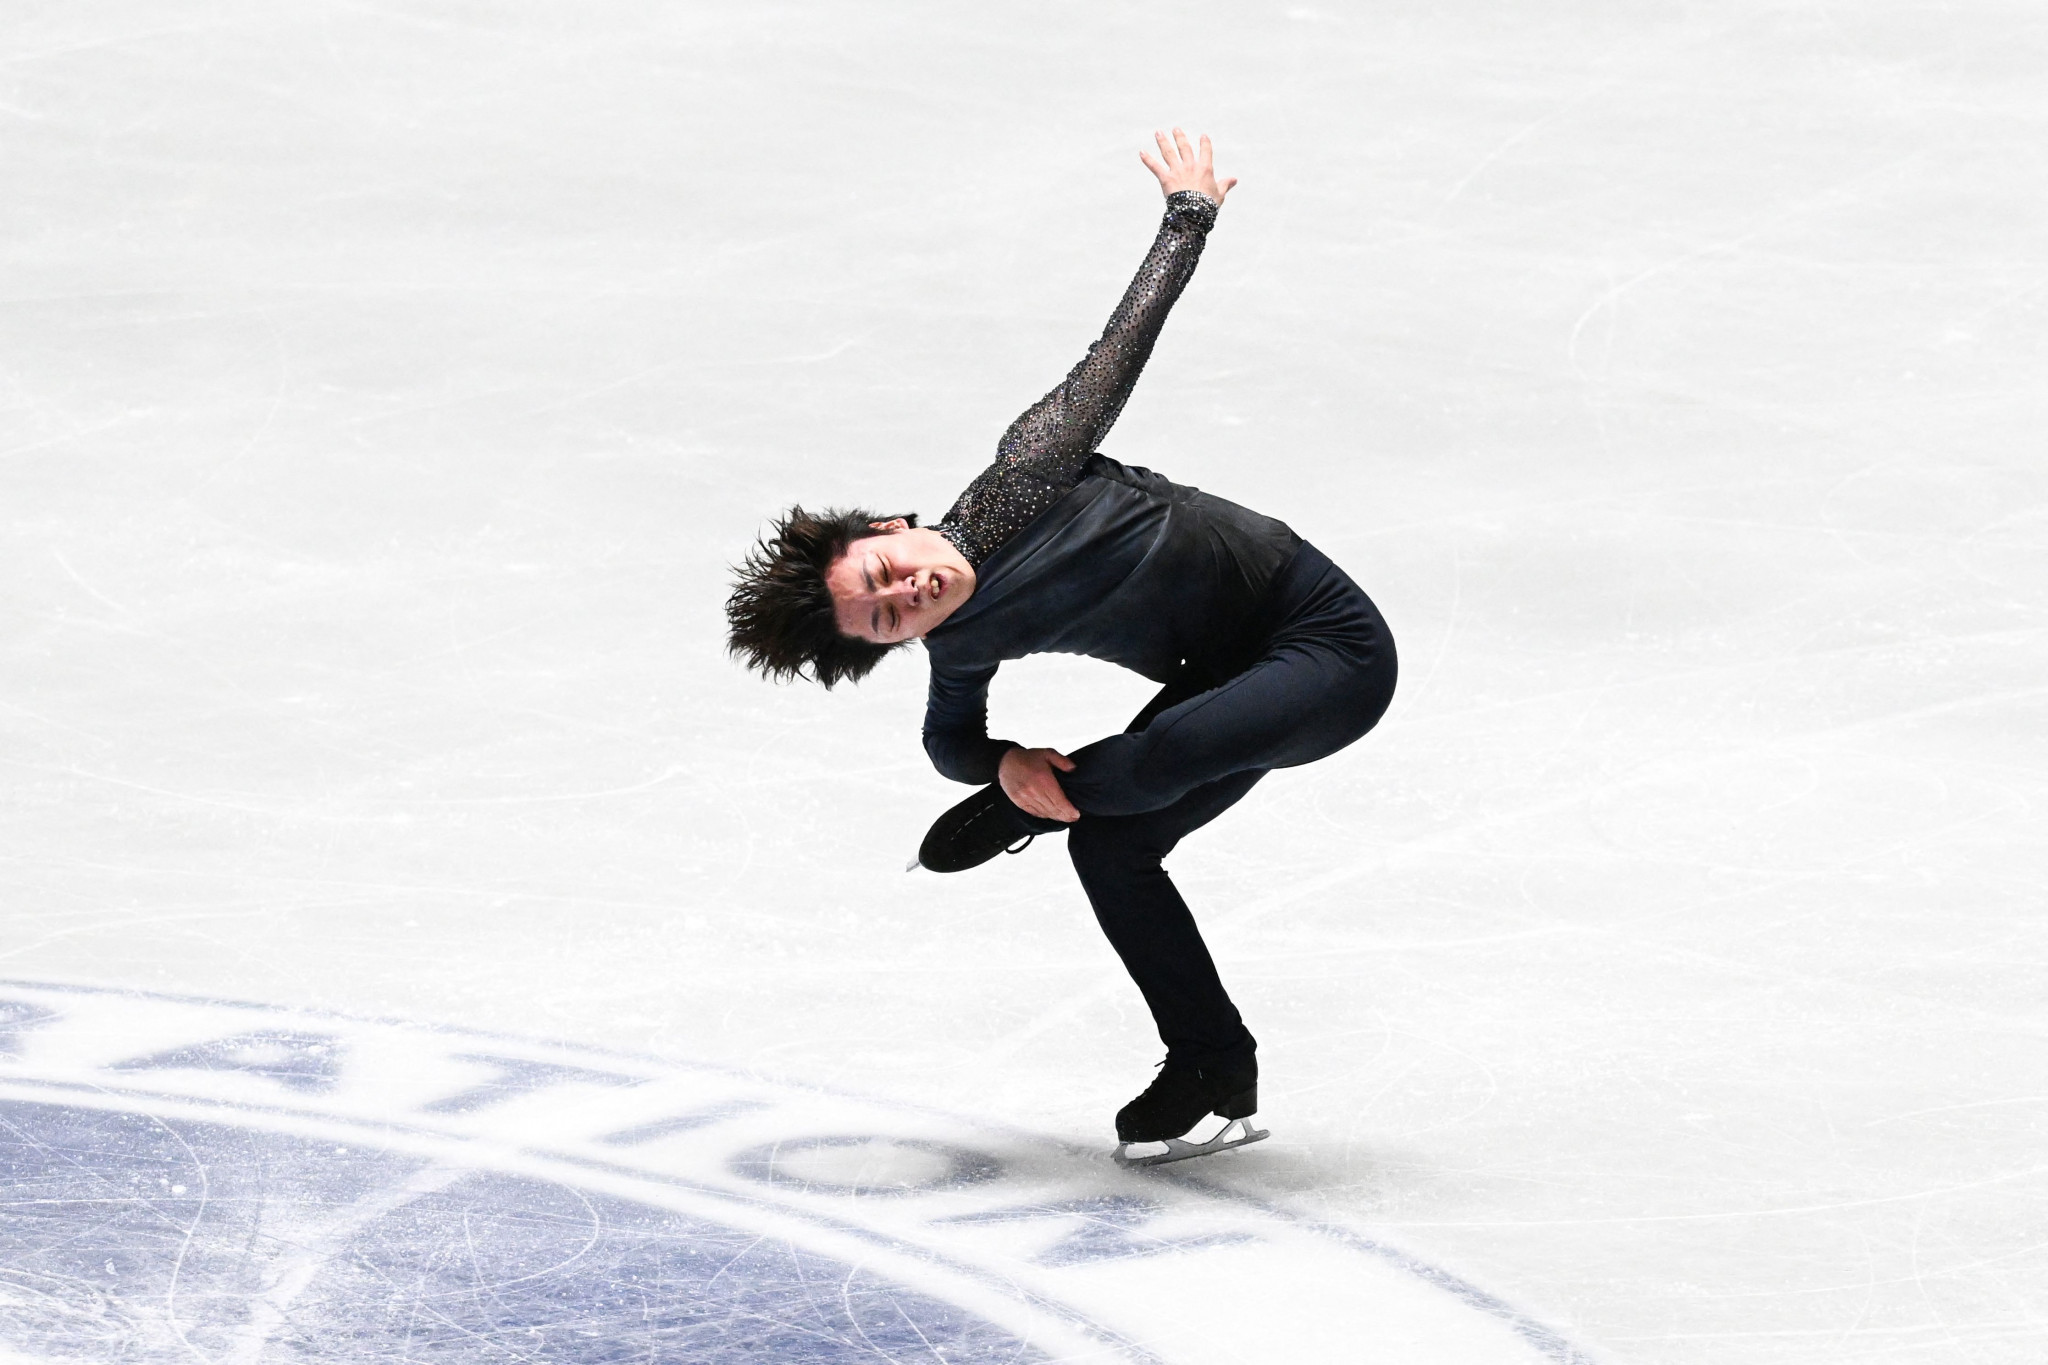 Uno and Sakamoto earn leads at NHK Trophy after short programme